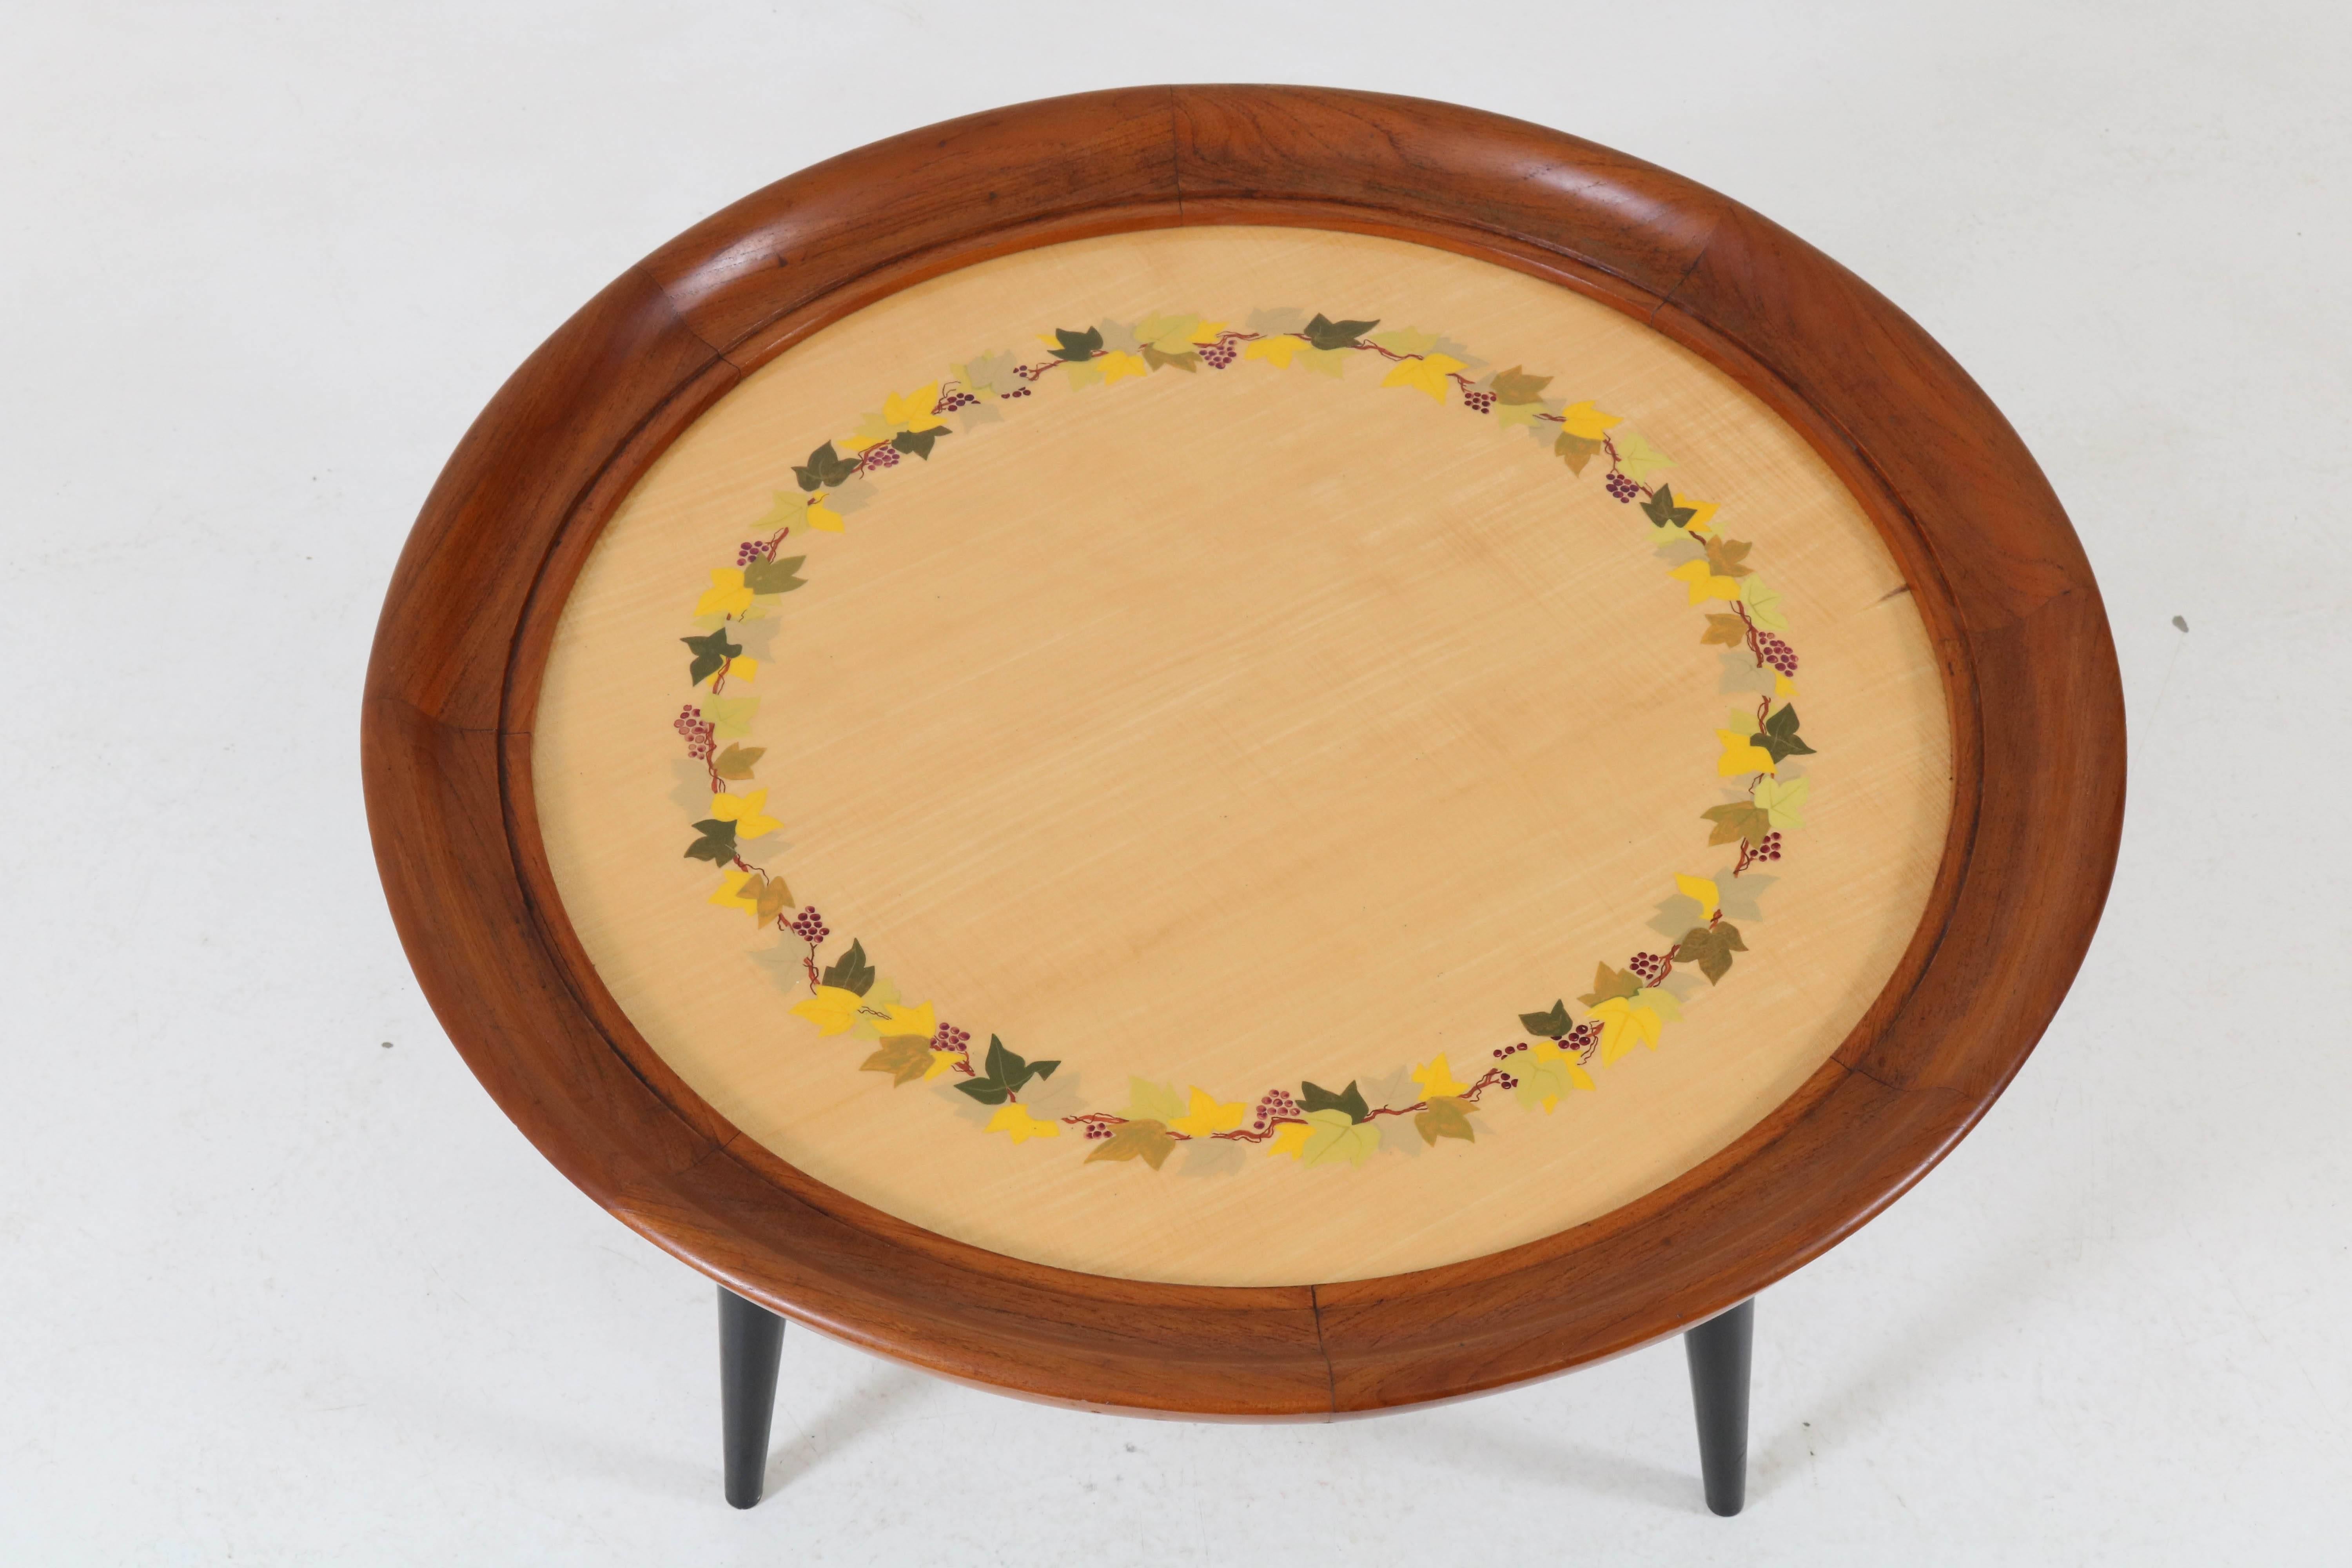 Italian Mid-Century Modern Fruitwood Coffee Table with Inlay, 1950s For Sale 1